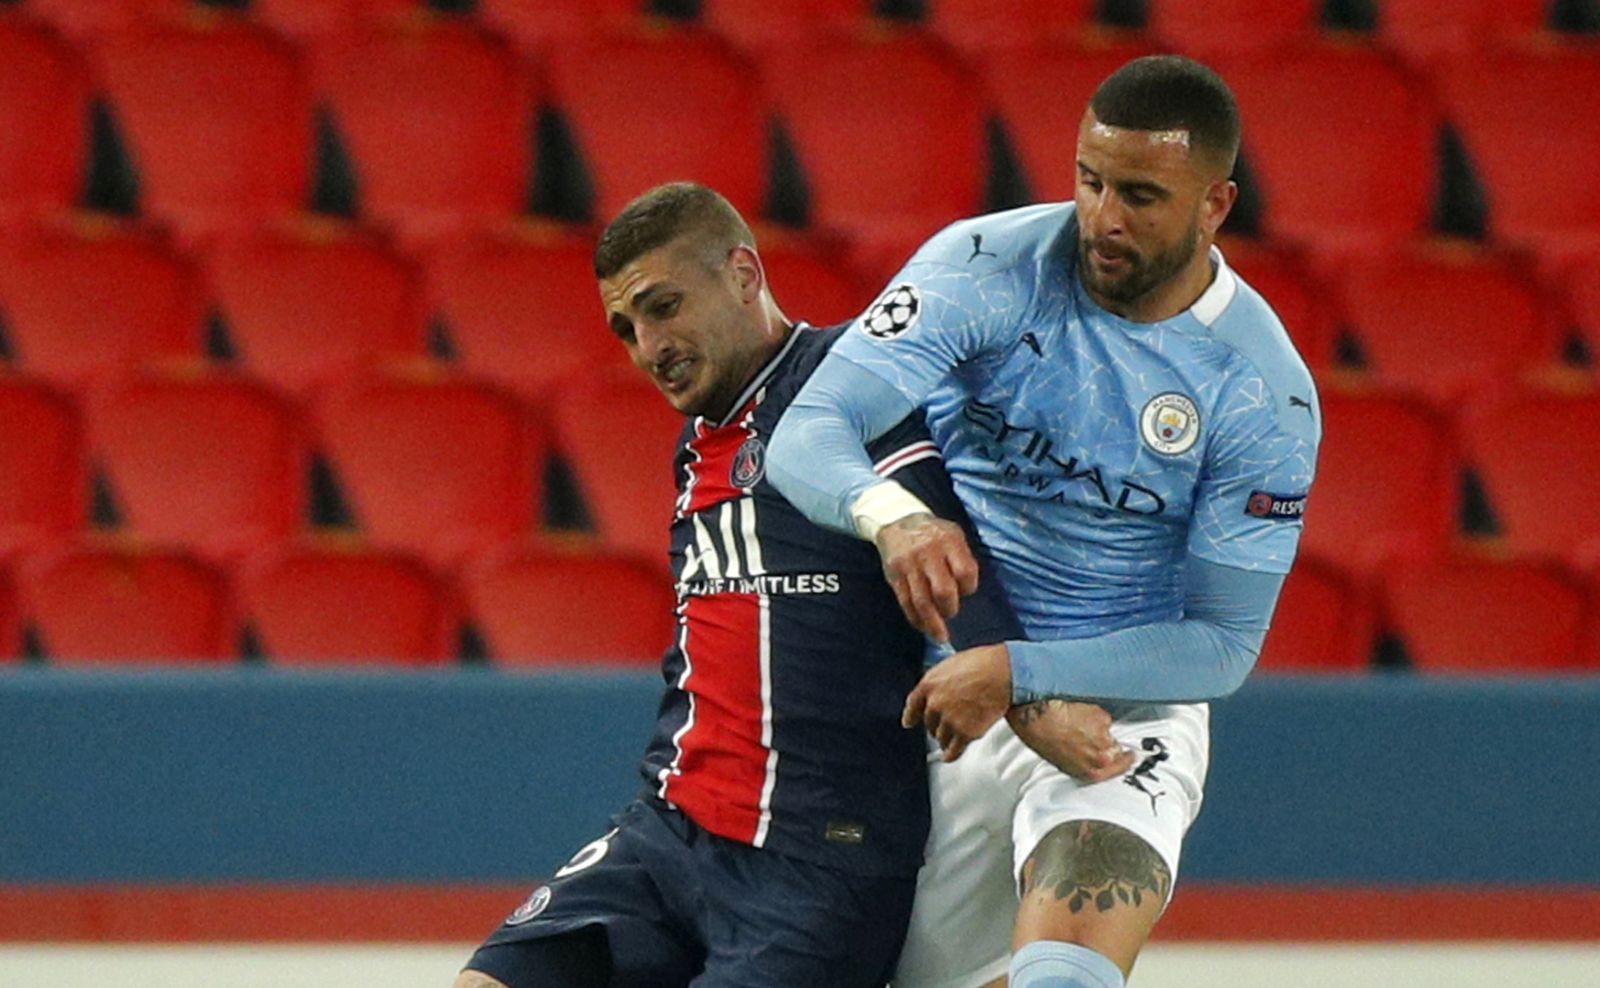 epa09165943 Paris Saint Germain's Marco Verratti (L) and Manchester City's Kyle Walker (R) in action during the UEFA Champions League semi final, first leg soccer match between PSG and Manchester City at the Parc des Princes stadium in Paris, France, 28 April 2021.  EPA/YOAN VALAT